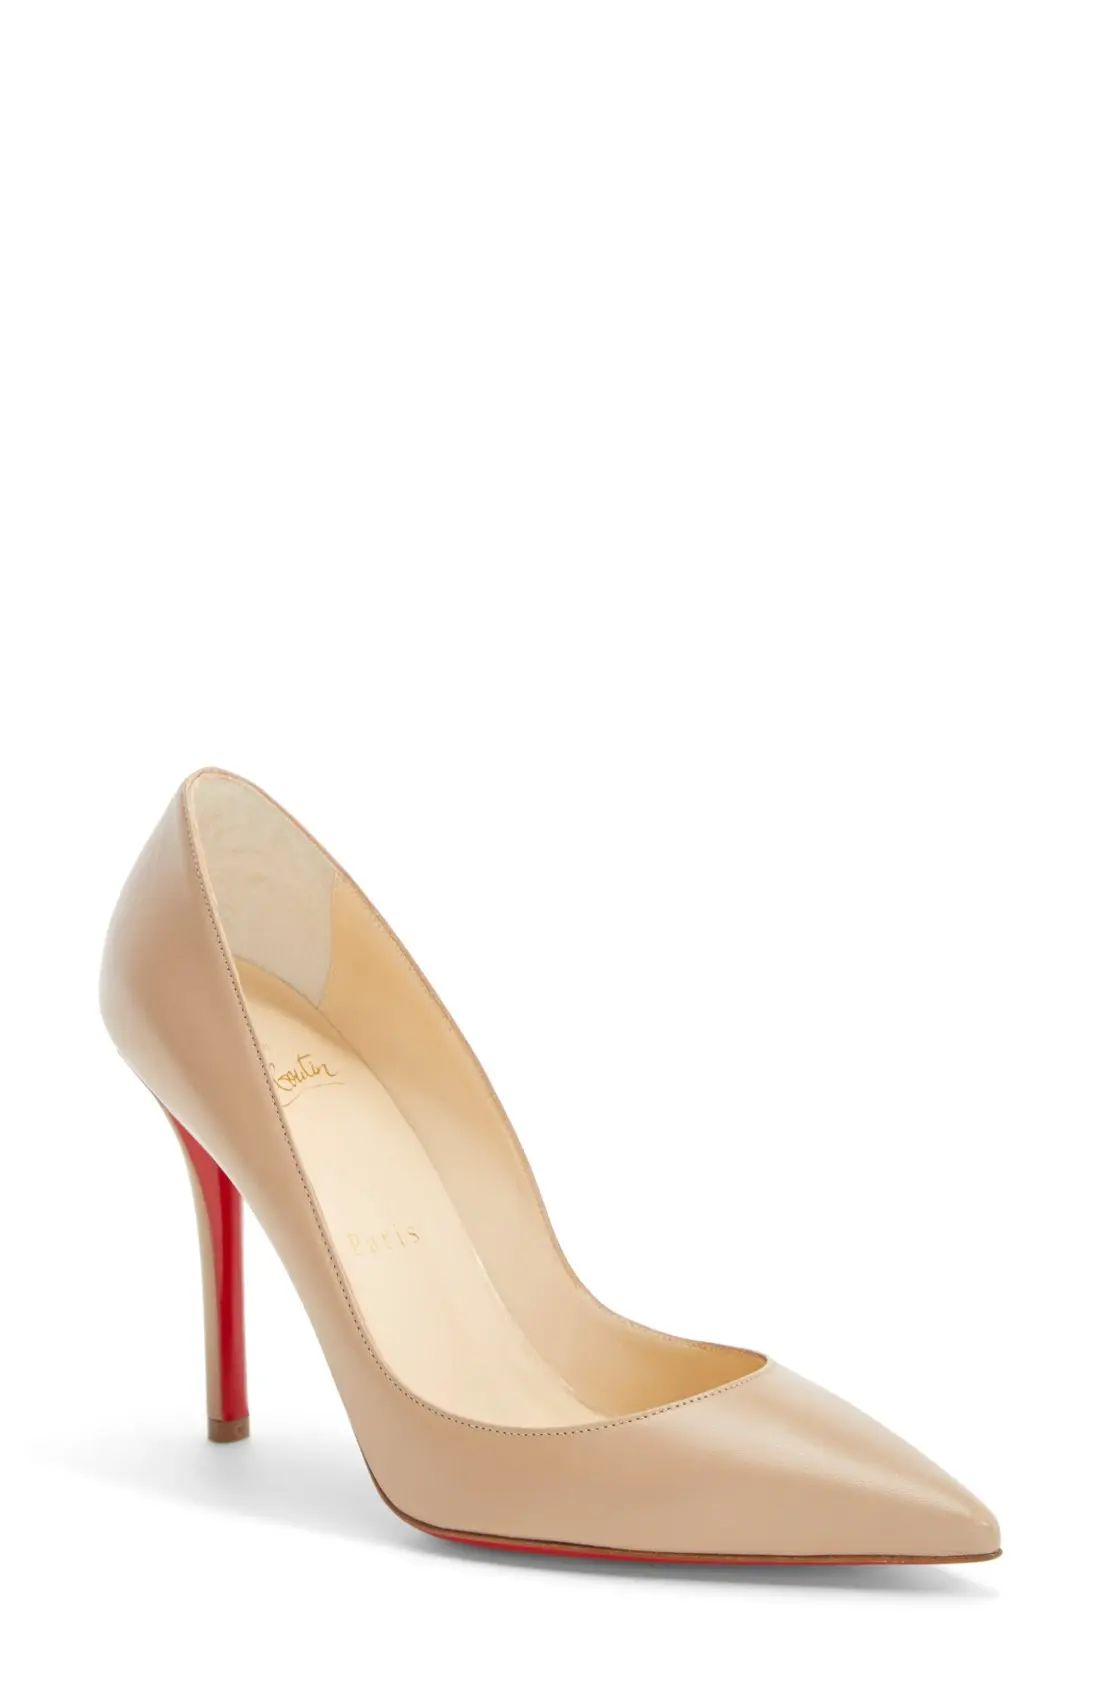 'Apostrophy' Pointy Toe Pump | Nordstrom